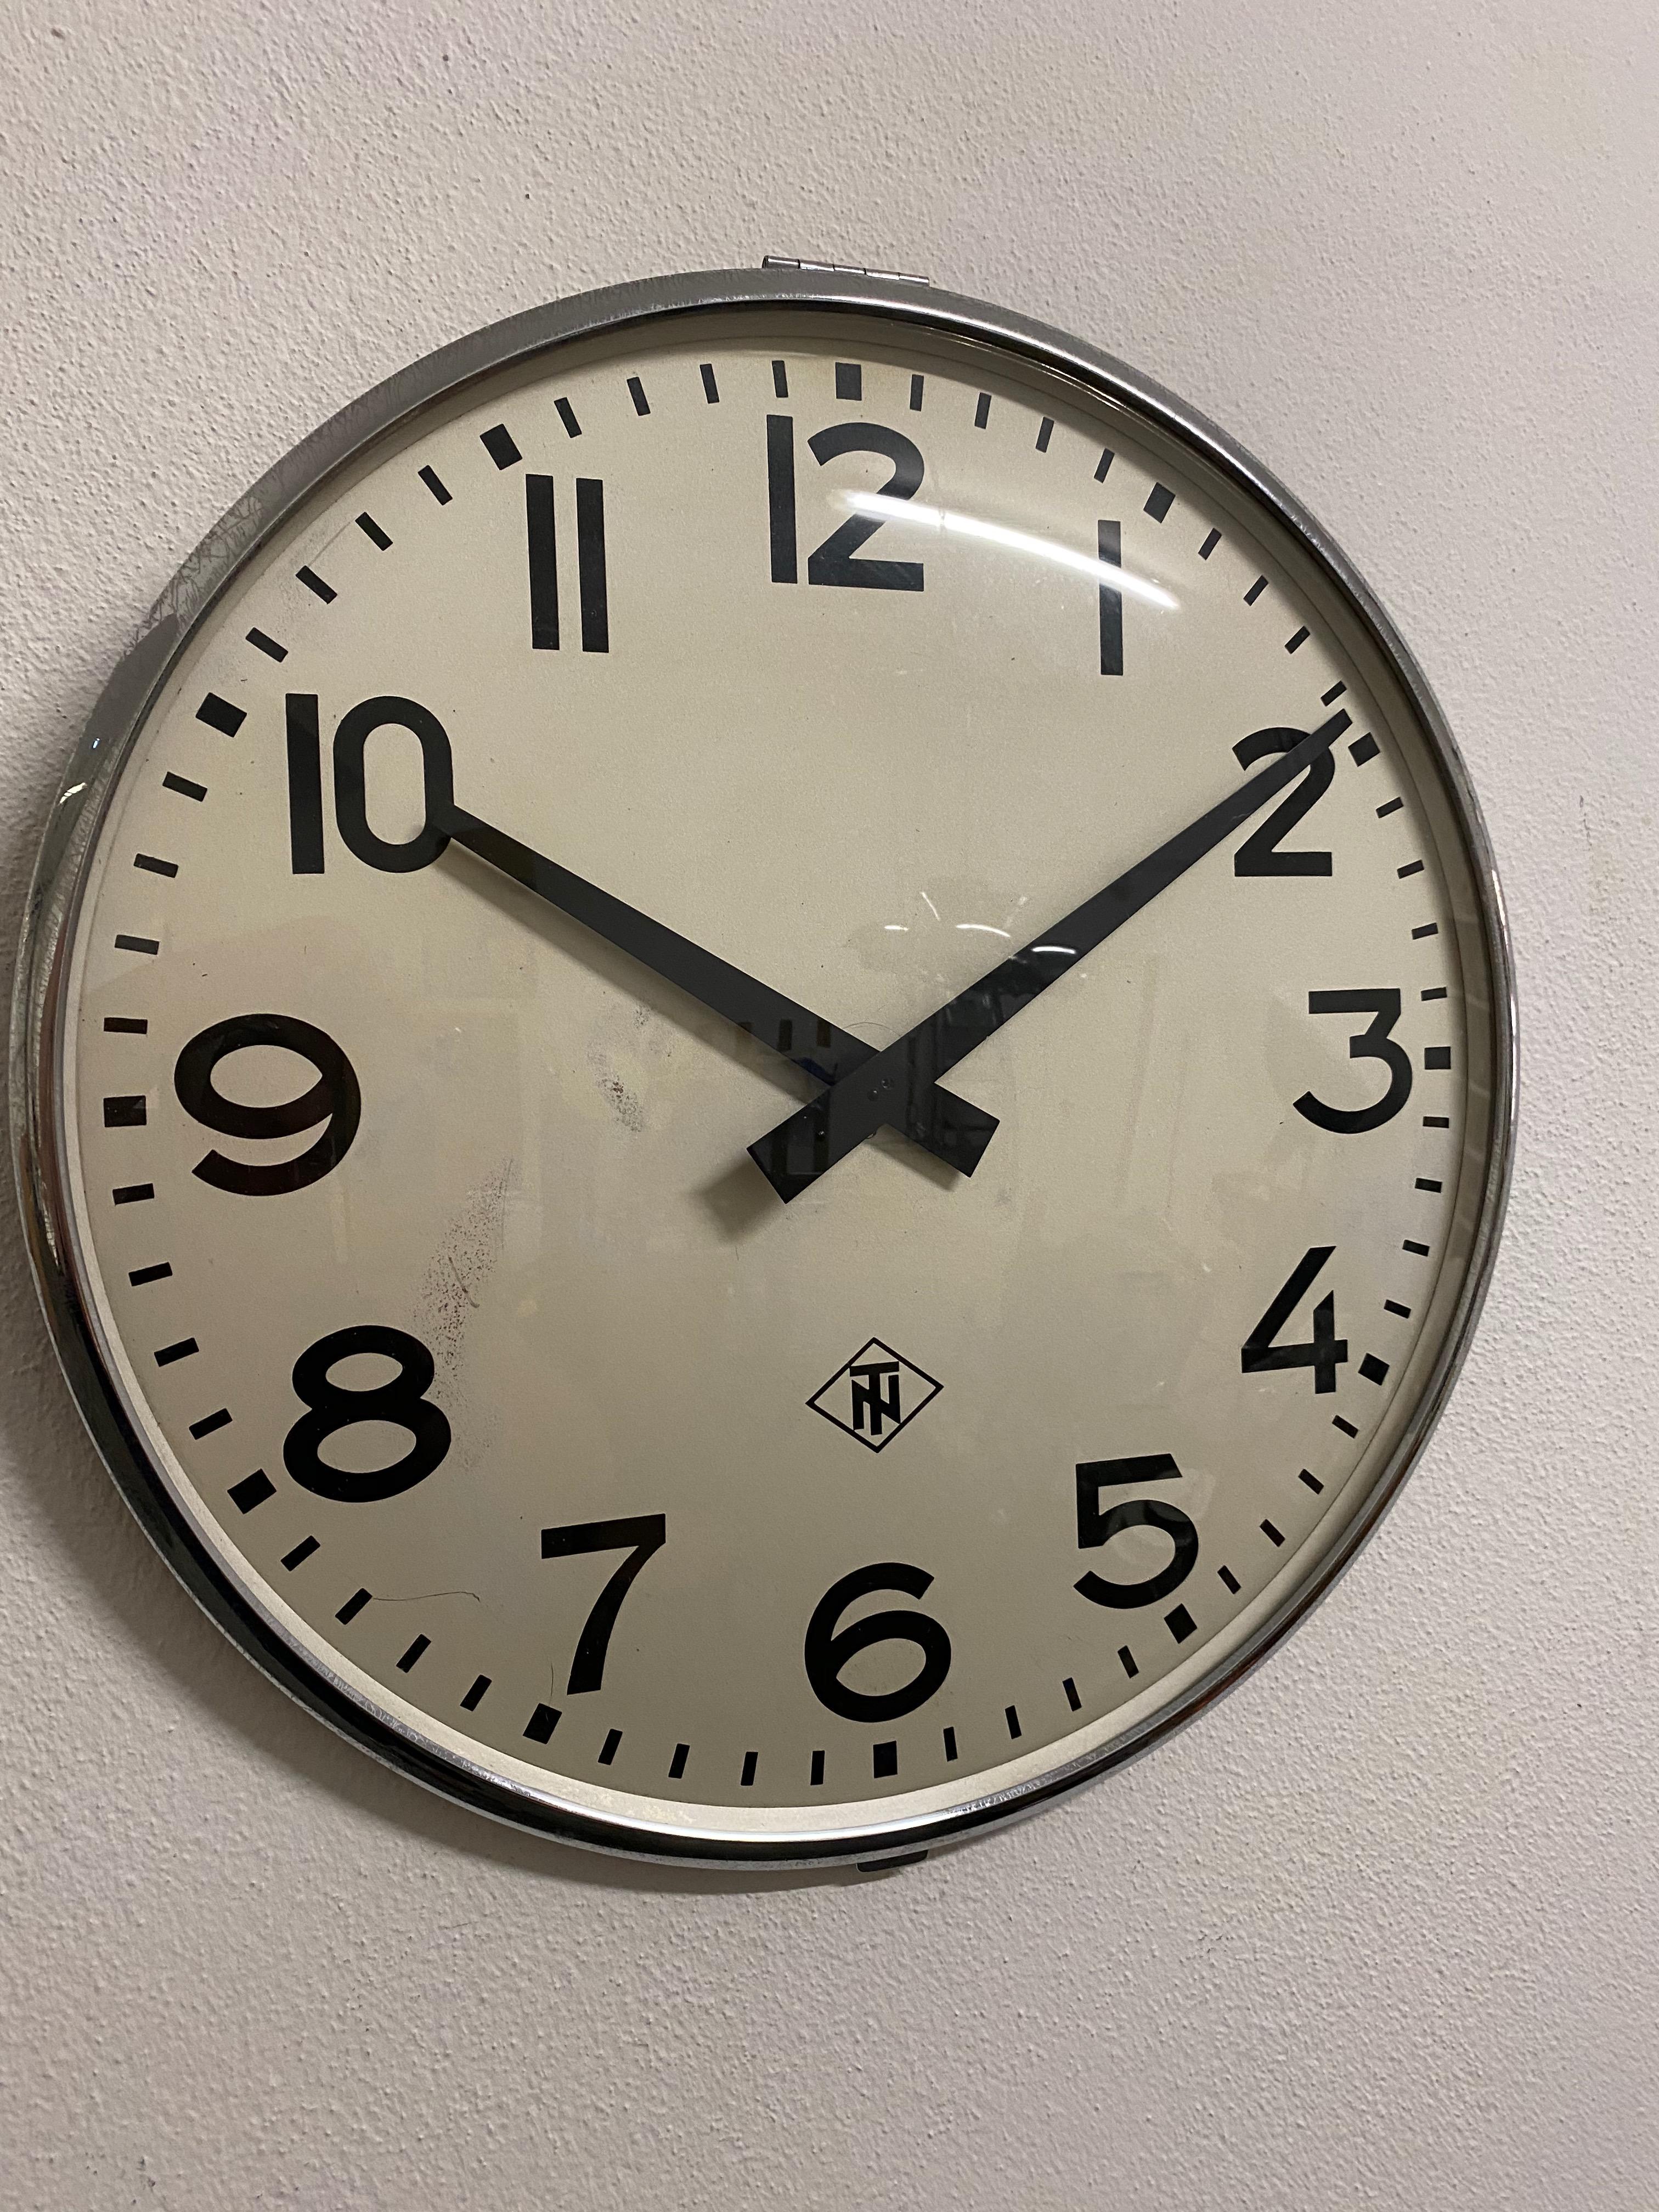 Steel frame painted with an aluminum clock face, clock hand and glass cover. Made in Germany in the late 1970s by TN (Telefonbau und Normalzeit). Formerly a slave clock, it is now fitted with a modern quartz movement with an AA battery. Used but in